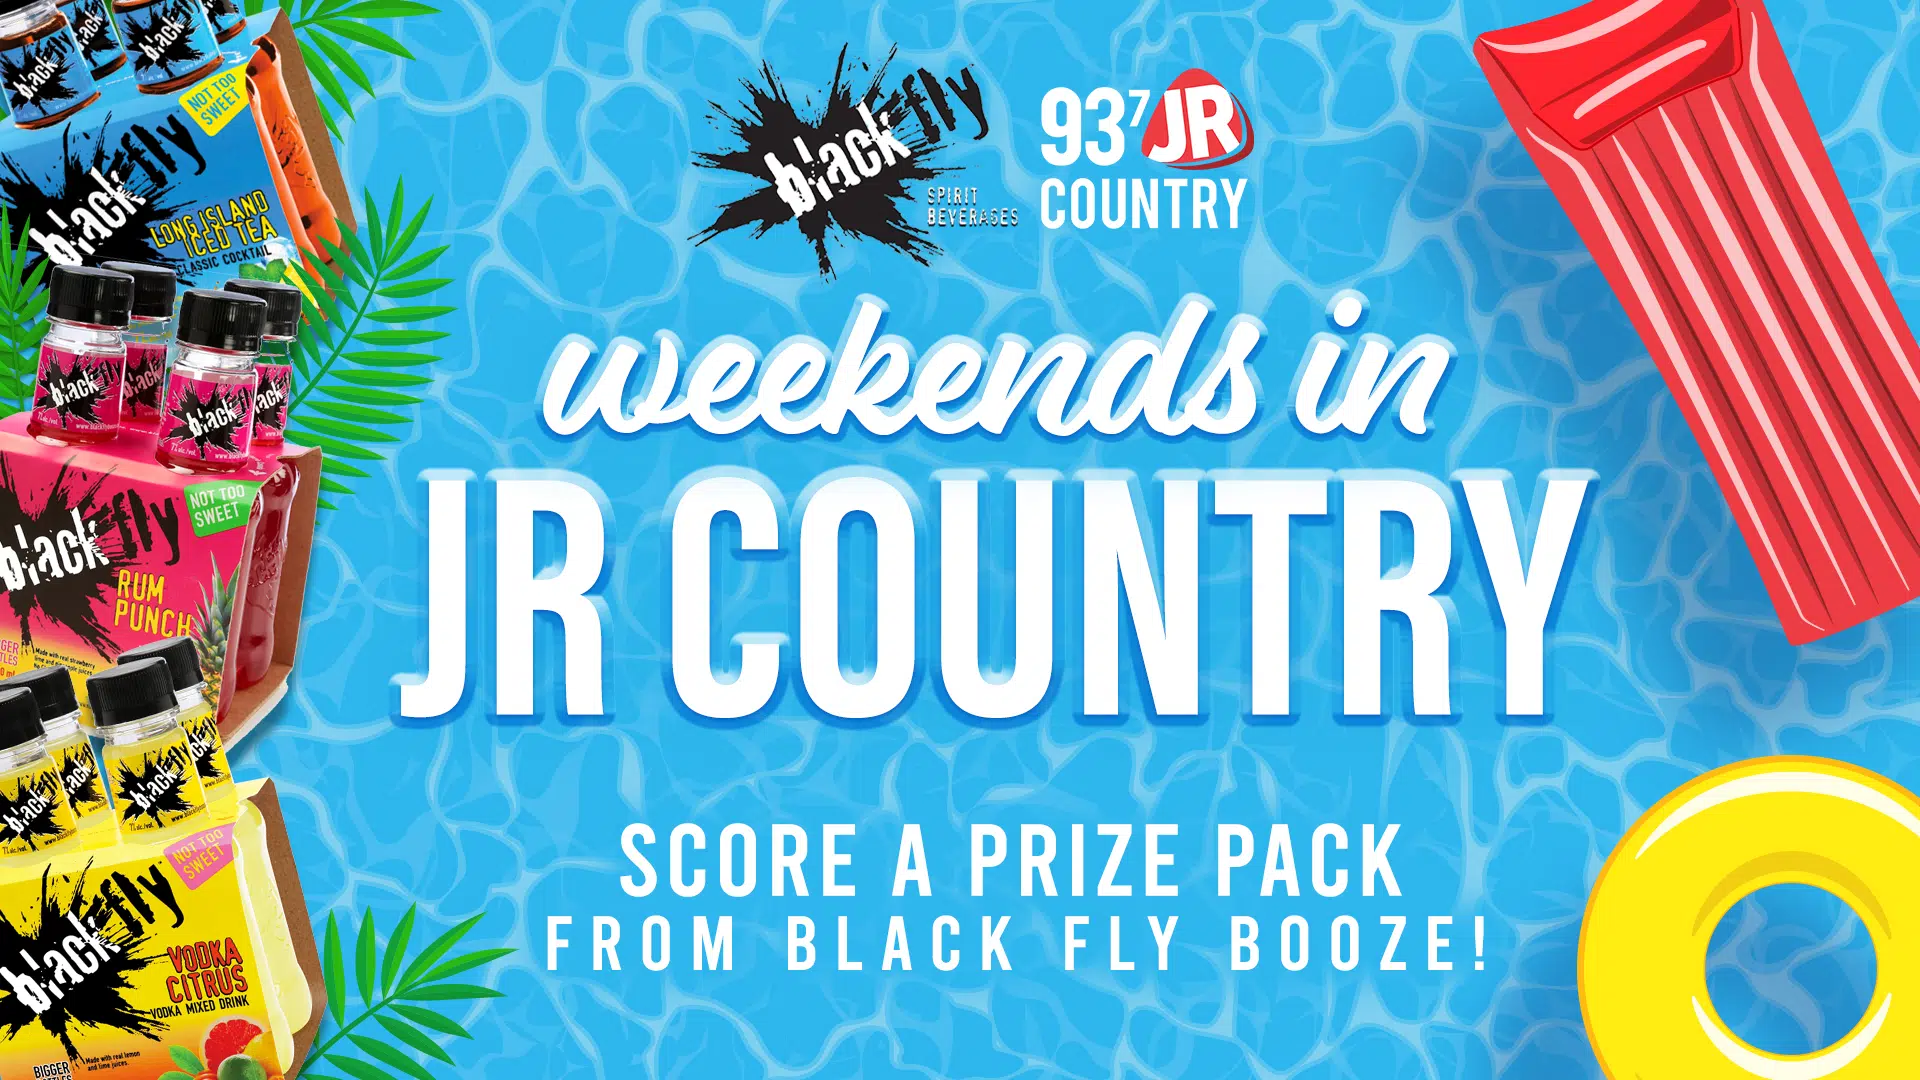 Summertime Weekends in JR Country with Blackfly Booze